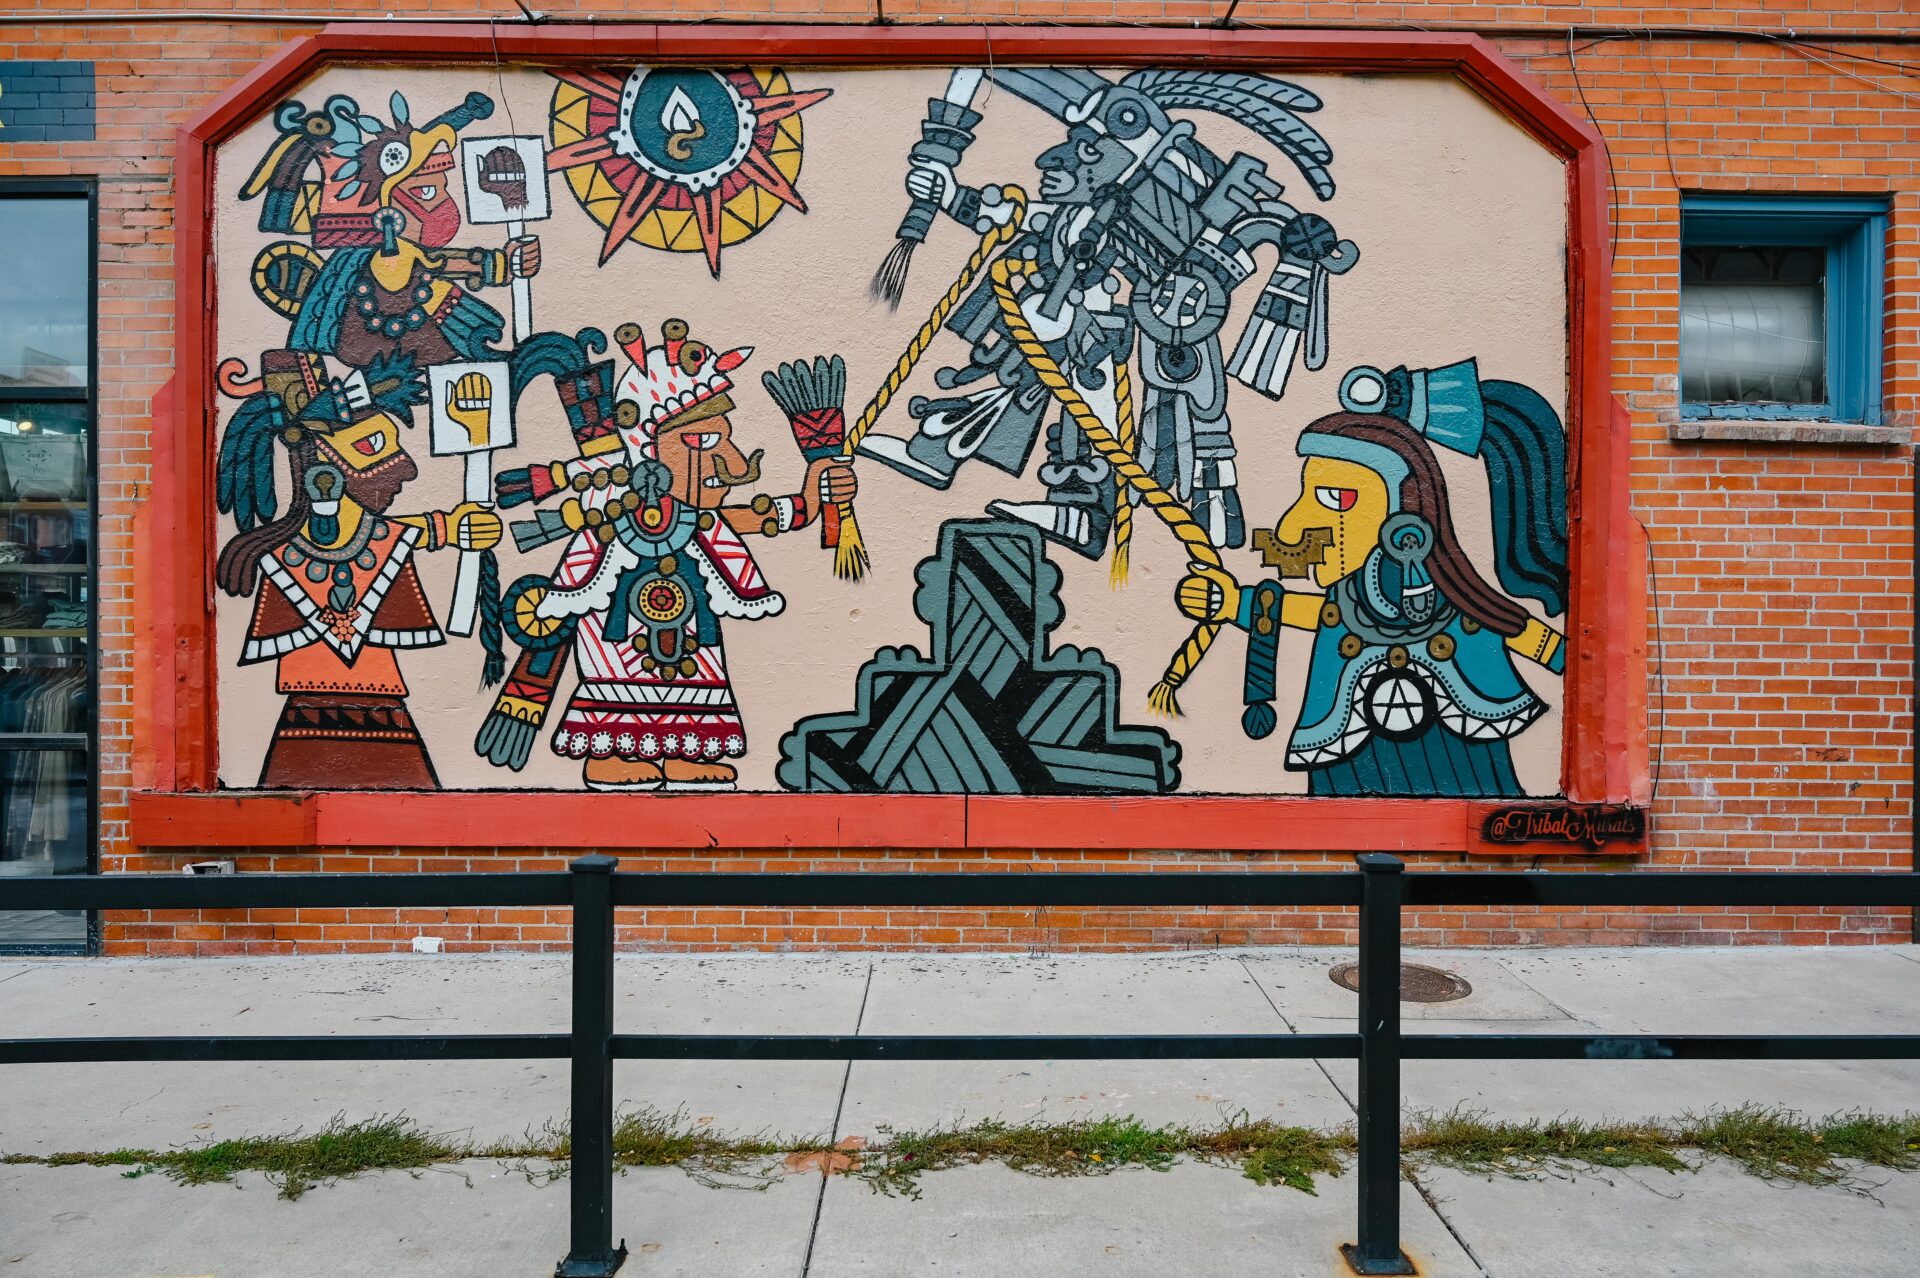 Alicia Cardenas' mural, located at 27th and Larimer in Denver